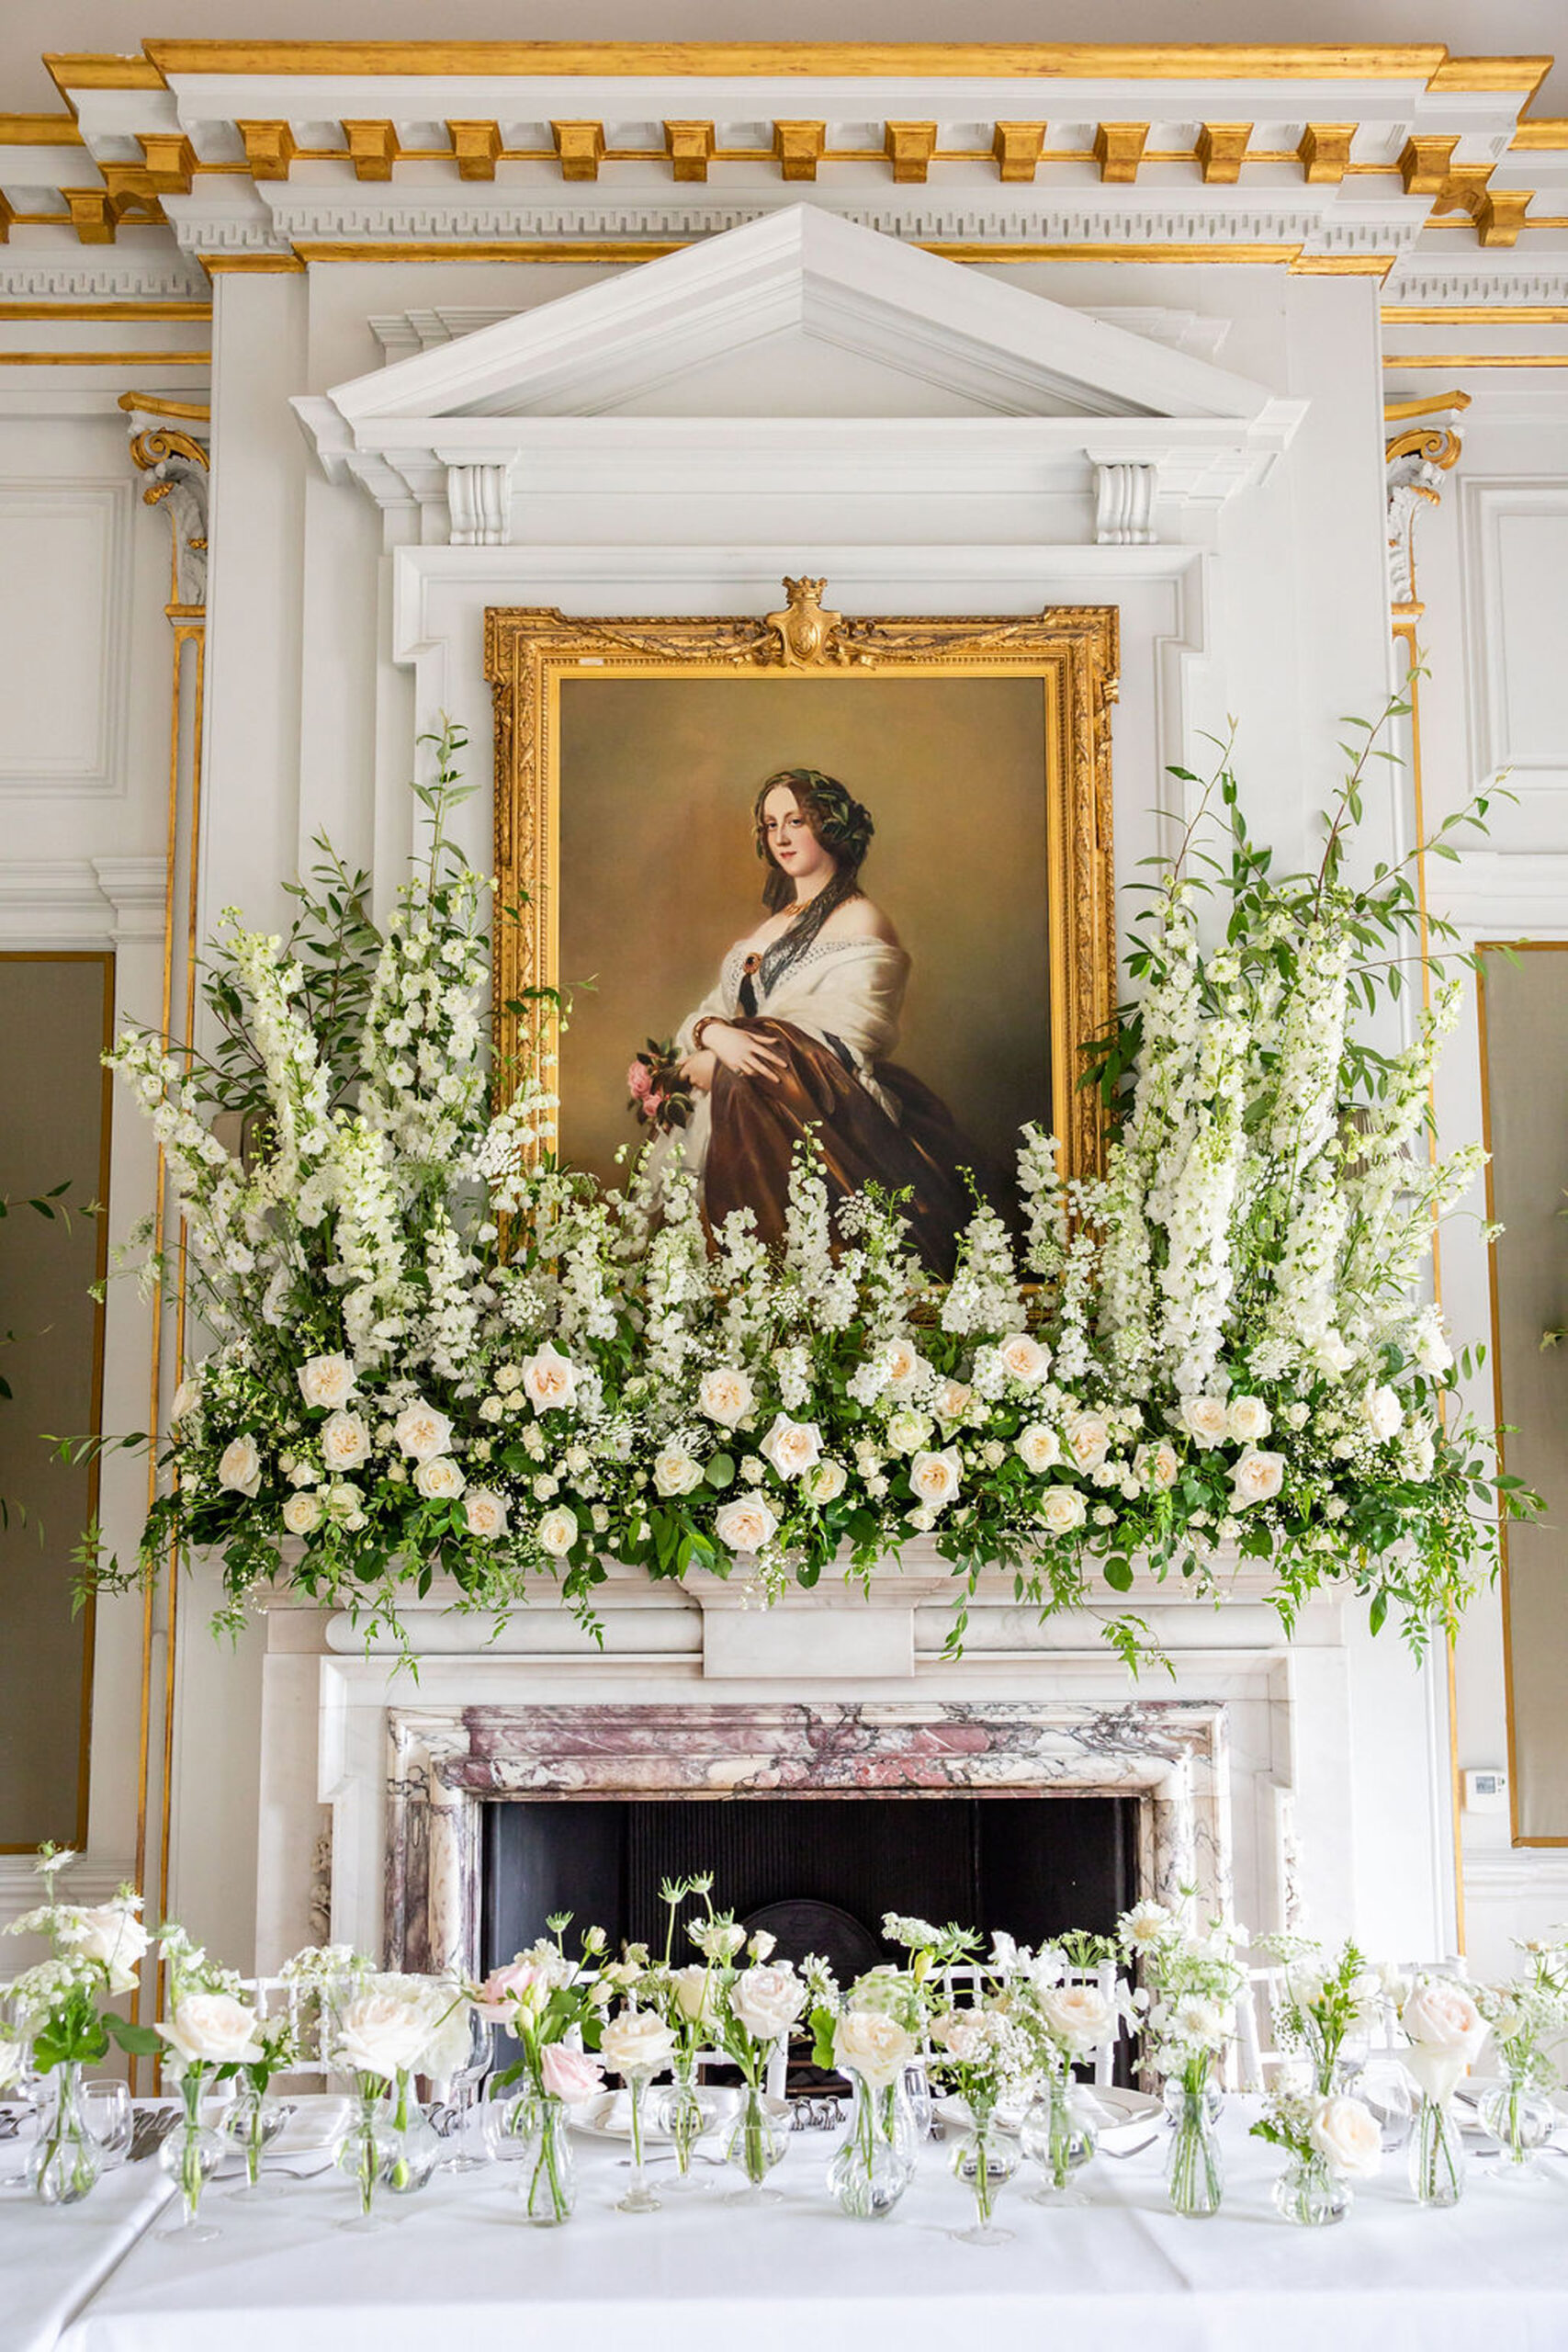 Elegant green and white floral display by Niemierko on a marble fireplace with a regal looking portrait in a gilt frame on the wall behind